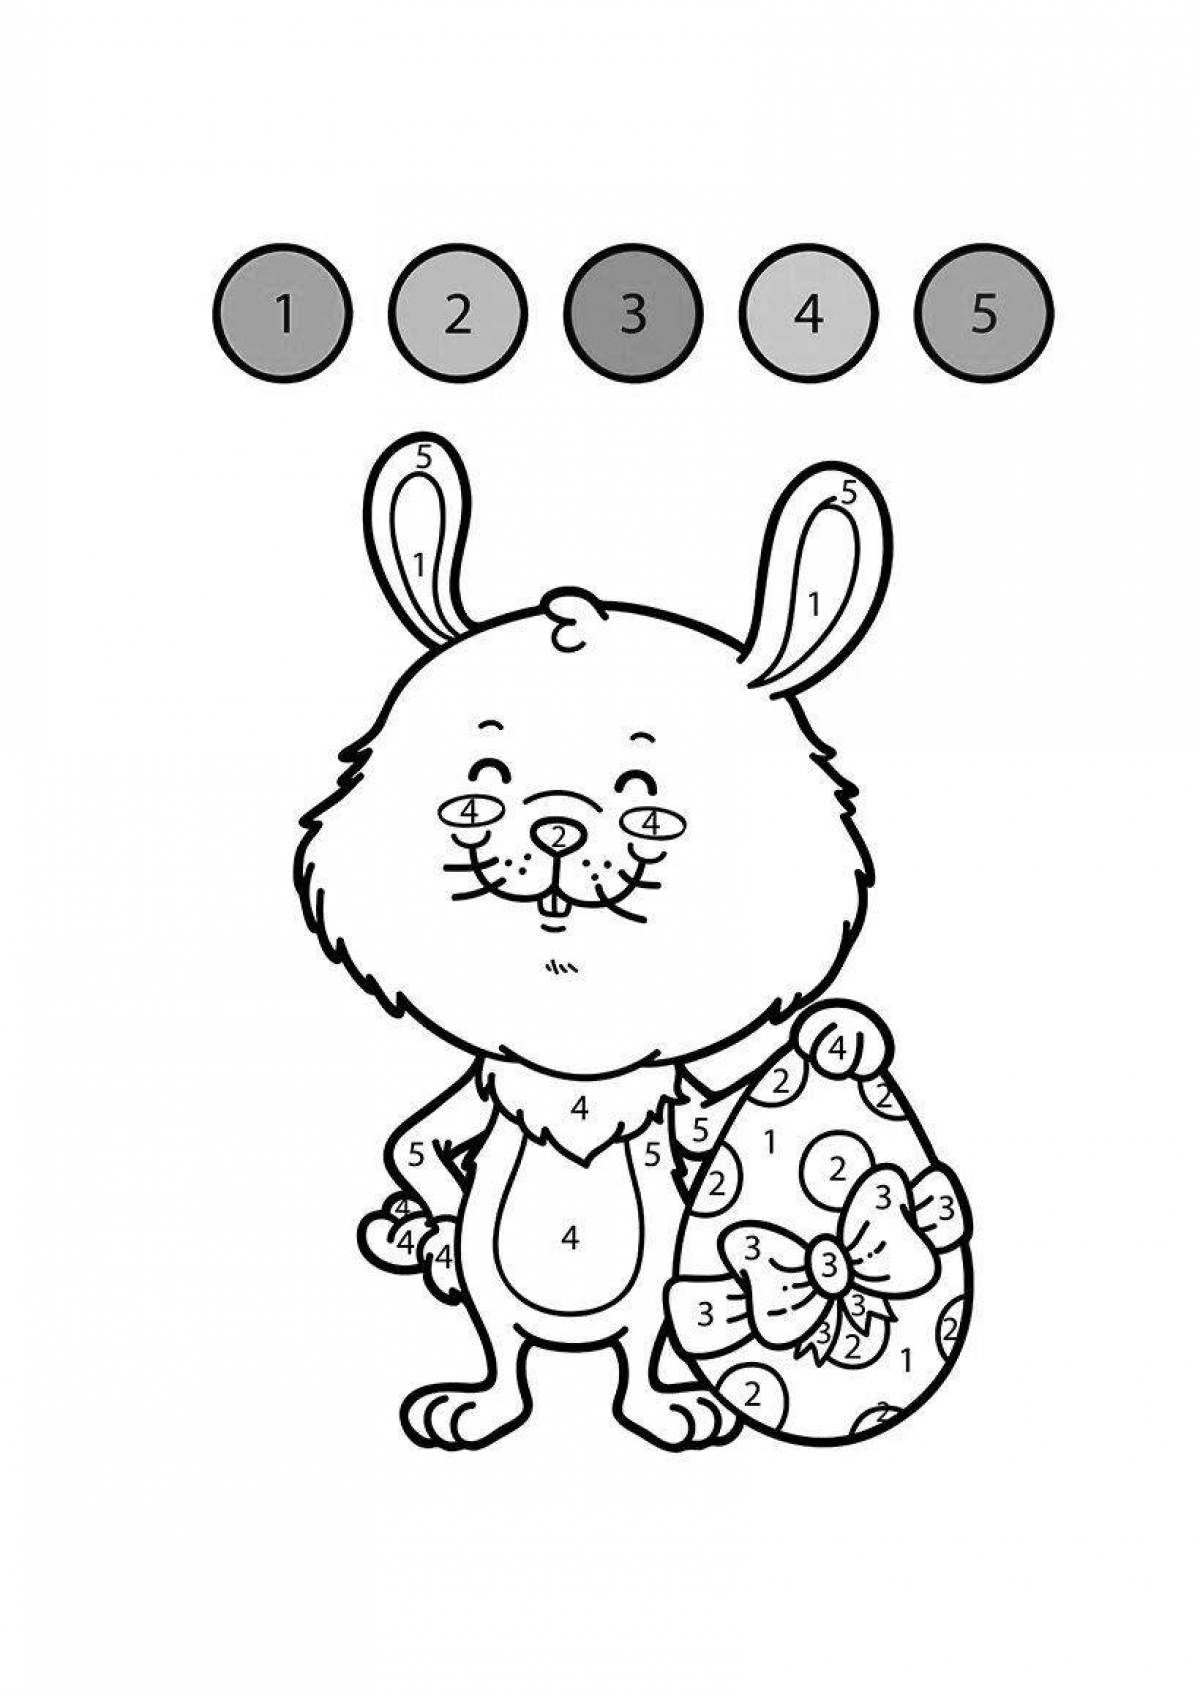 Colorful rabbit by numbers coloring page